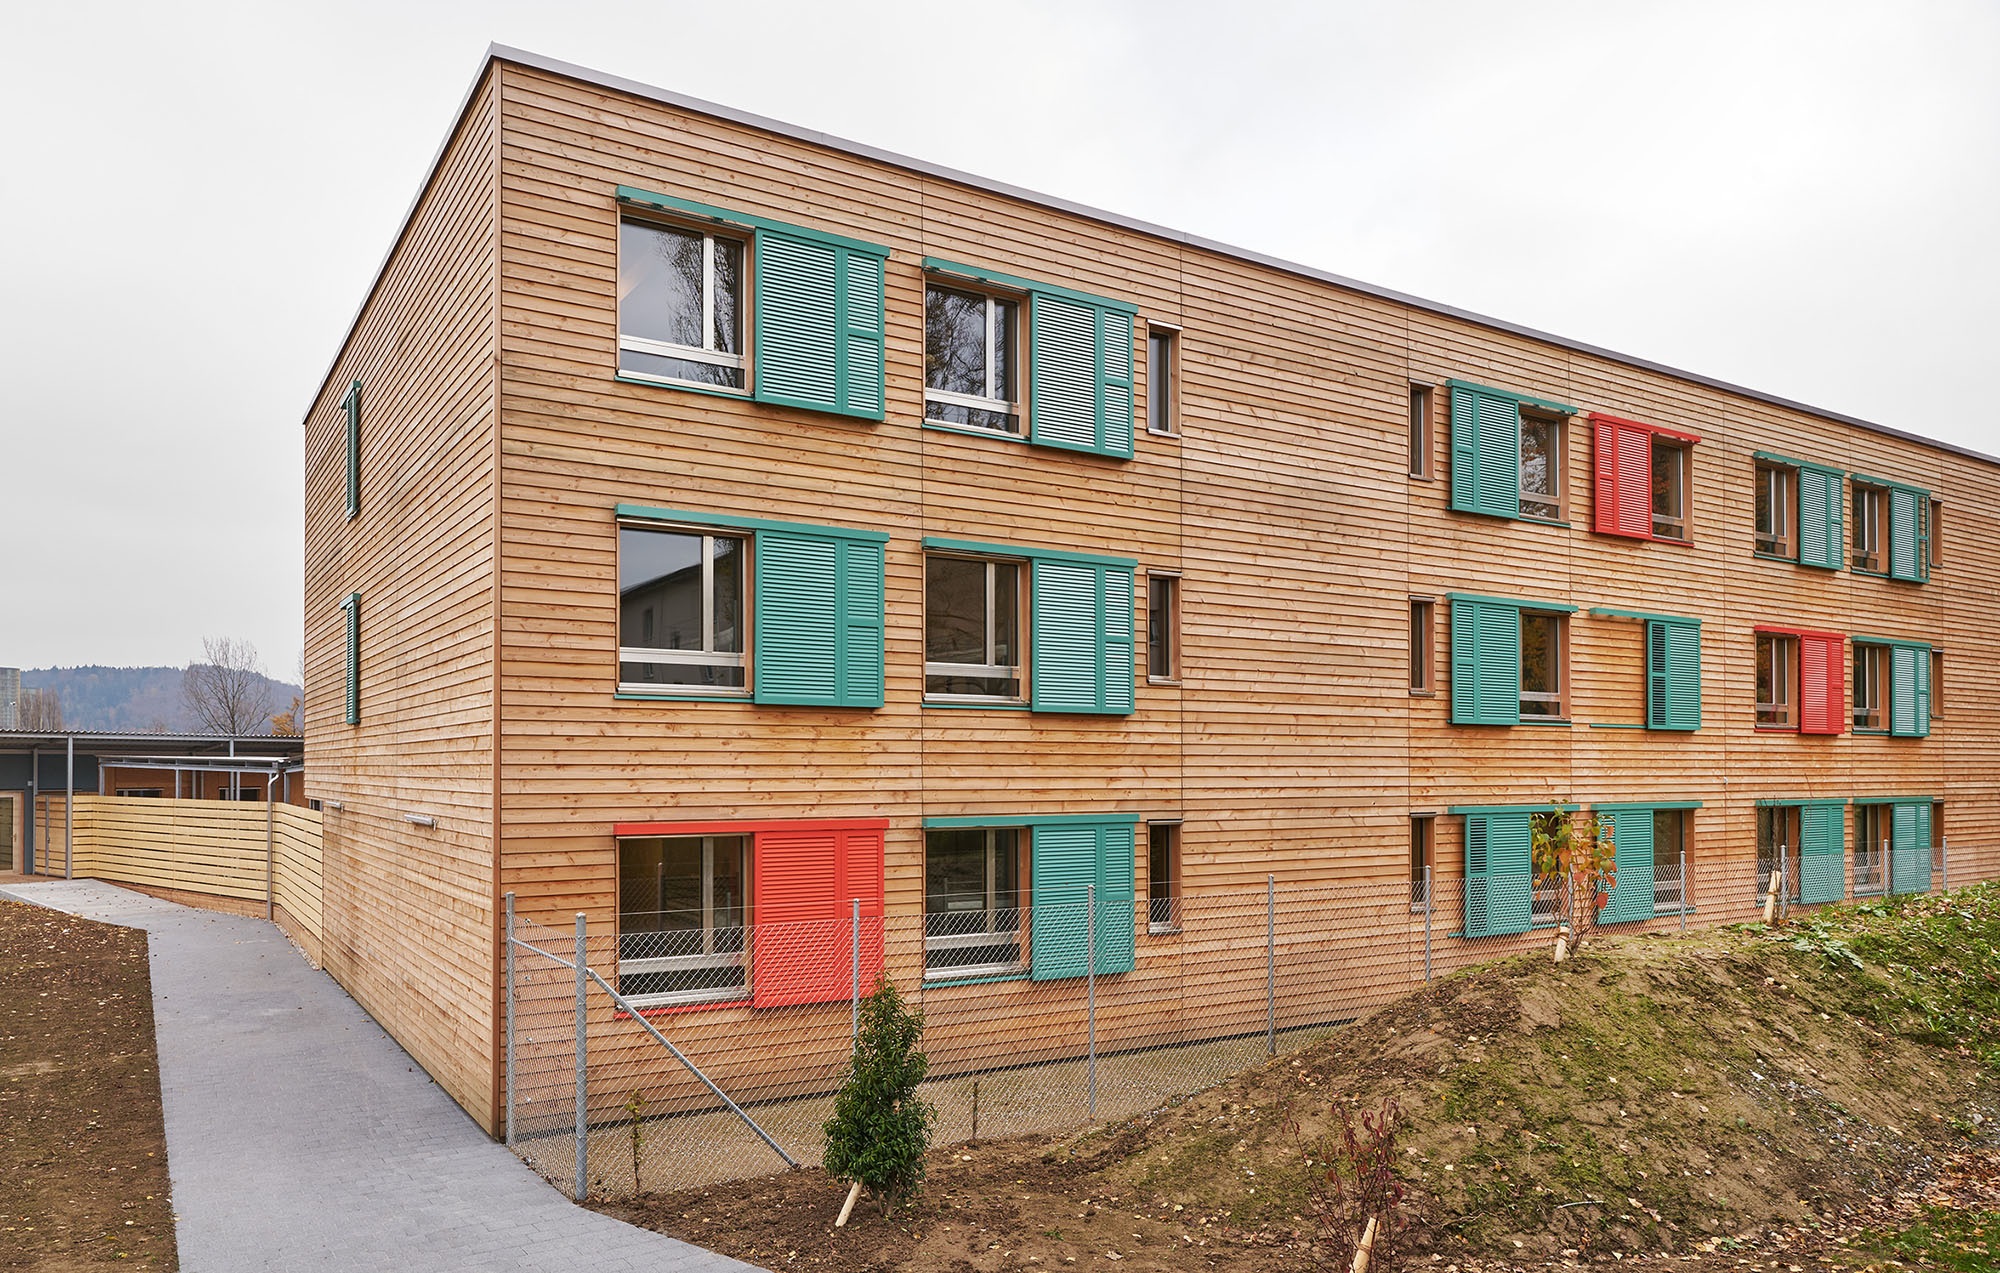 Modular housing provides temporary accommodation for asylum seekers.